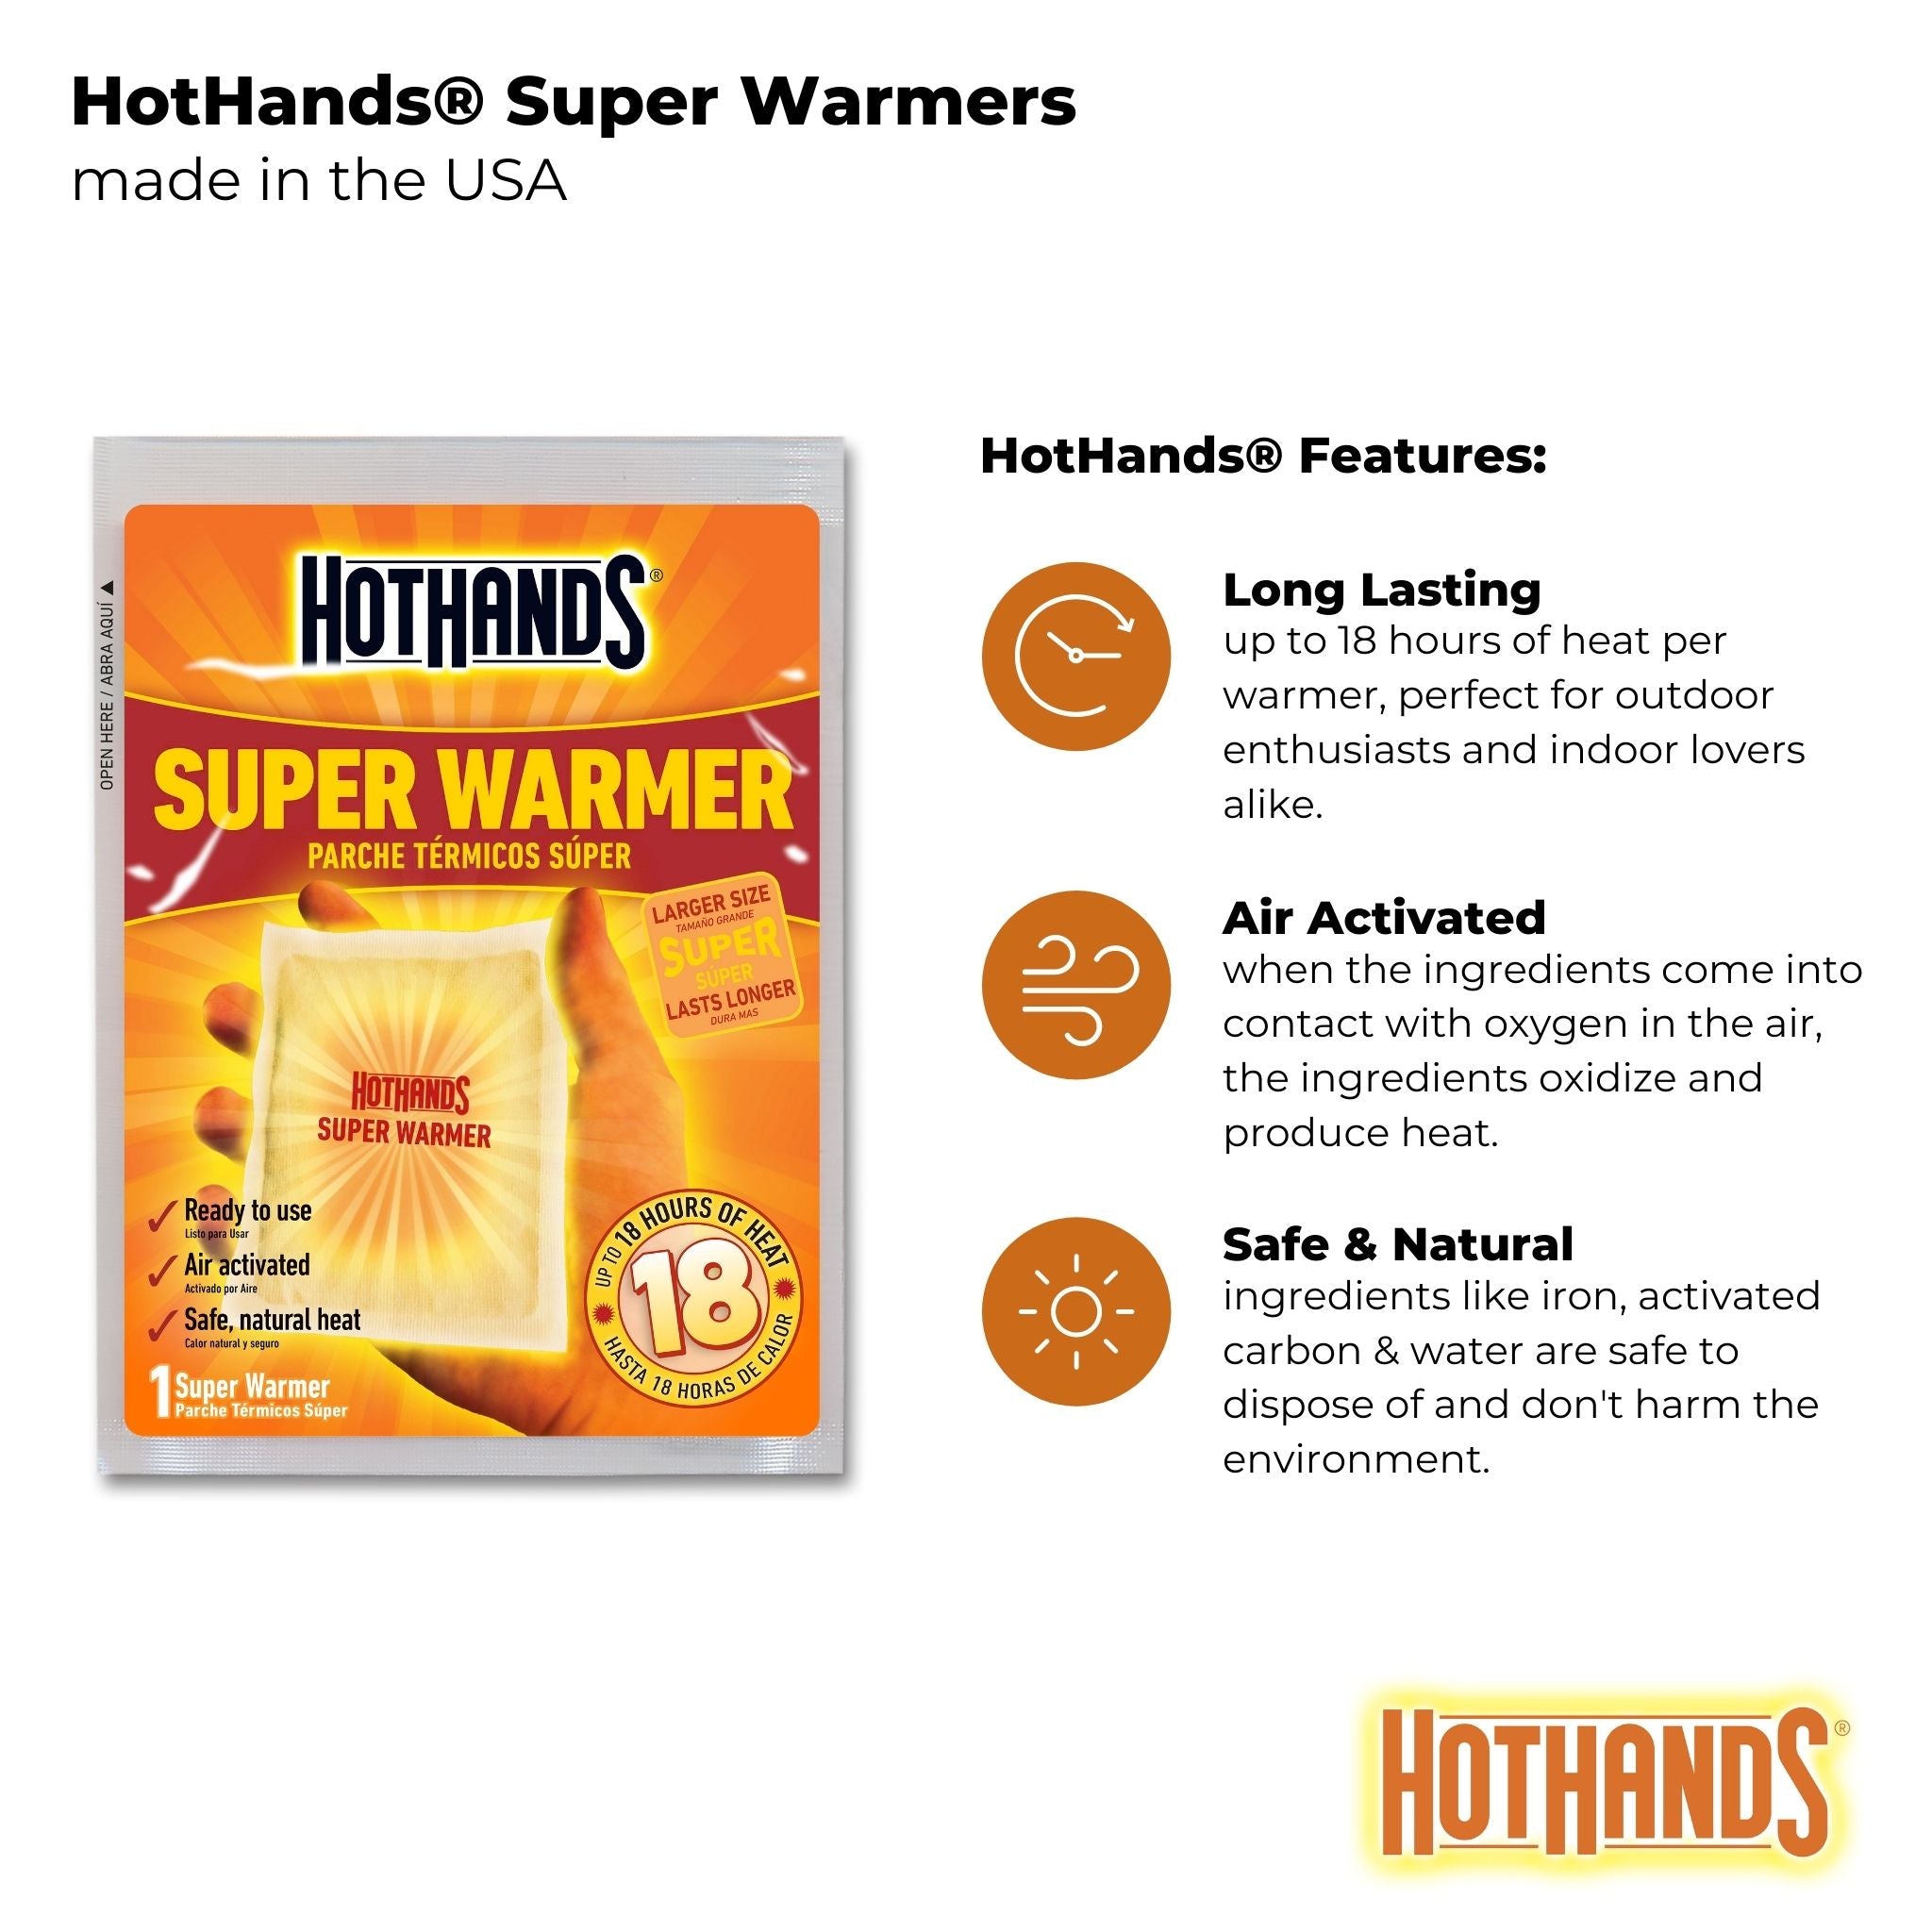 HotHands Large Body & Hand Super Warmers, 40-Pack